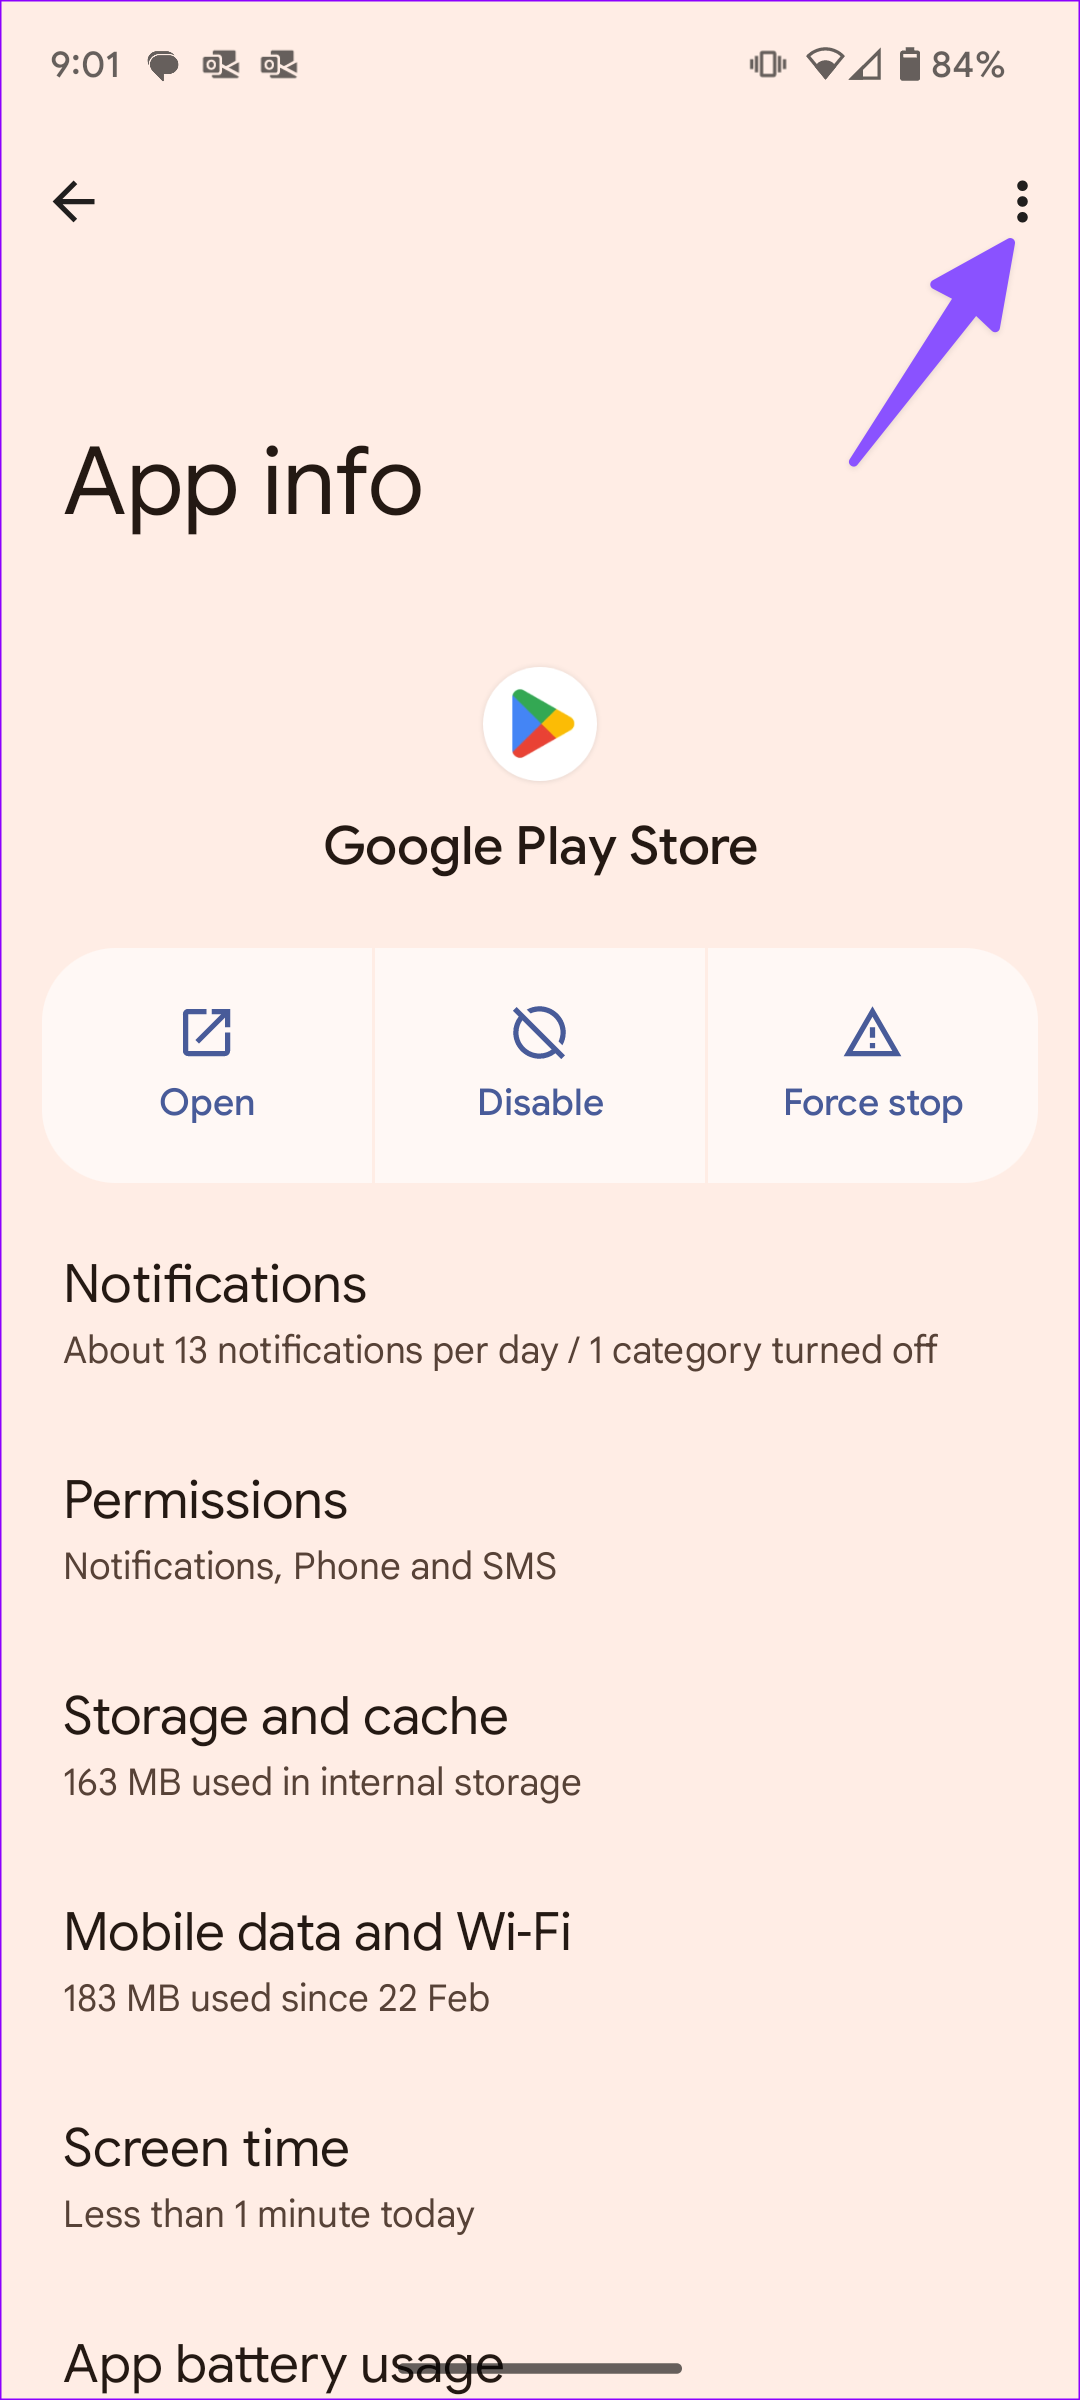 Google Forces Popular App to Drop APK Installation Support